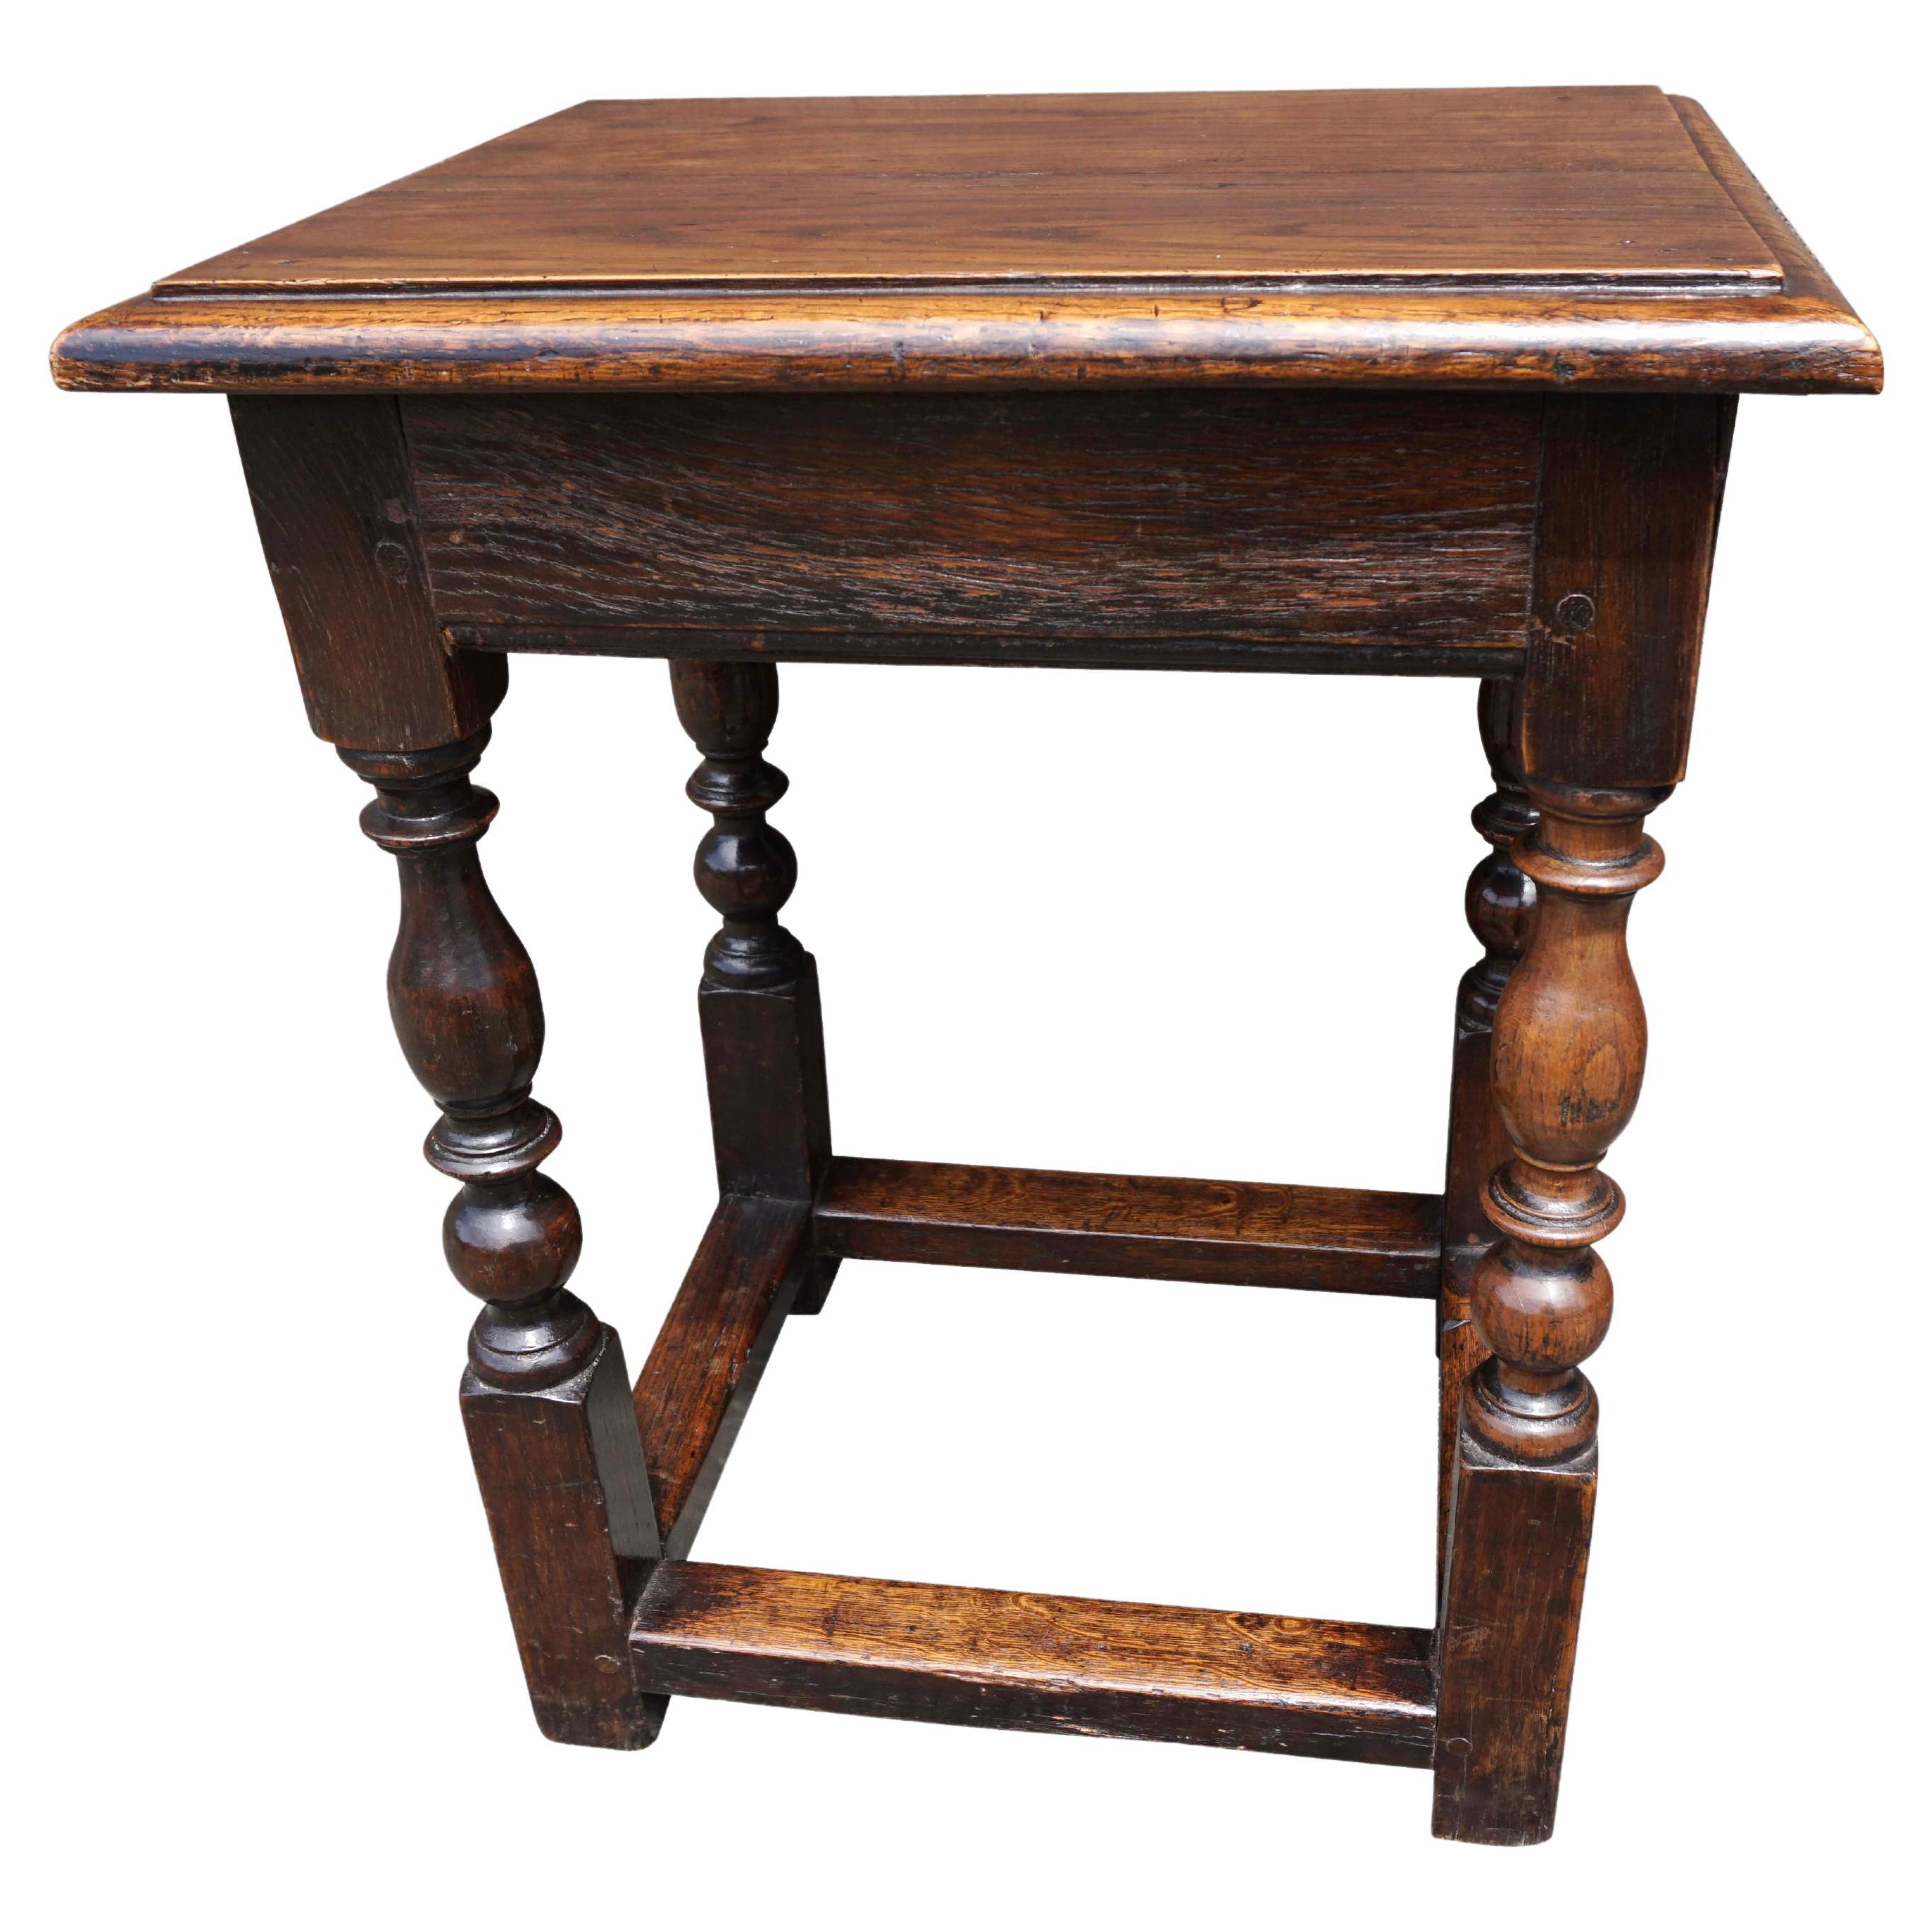 English William and Mary Style Oak Joint Stool